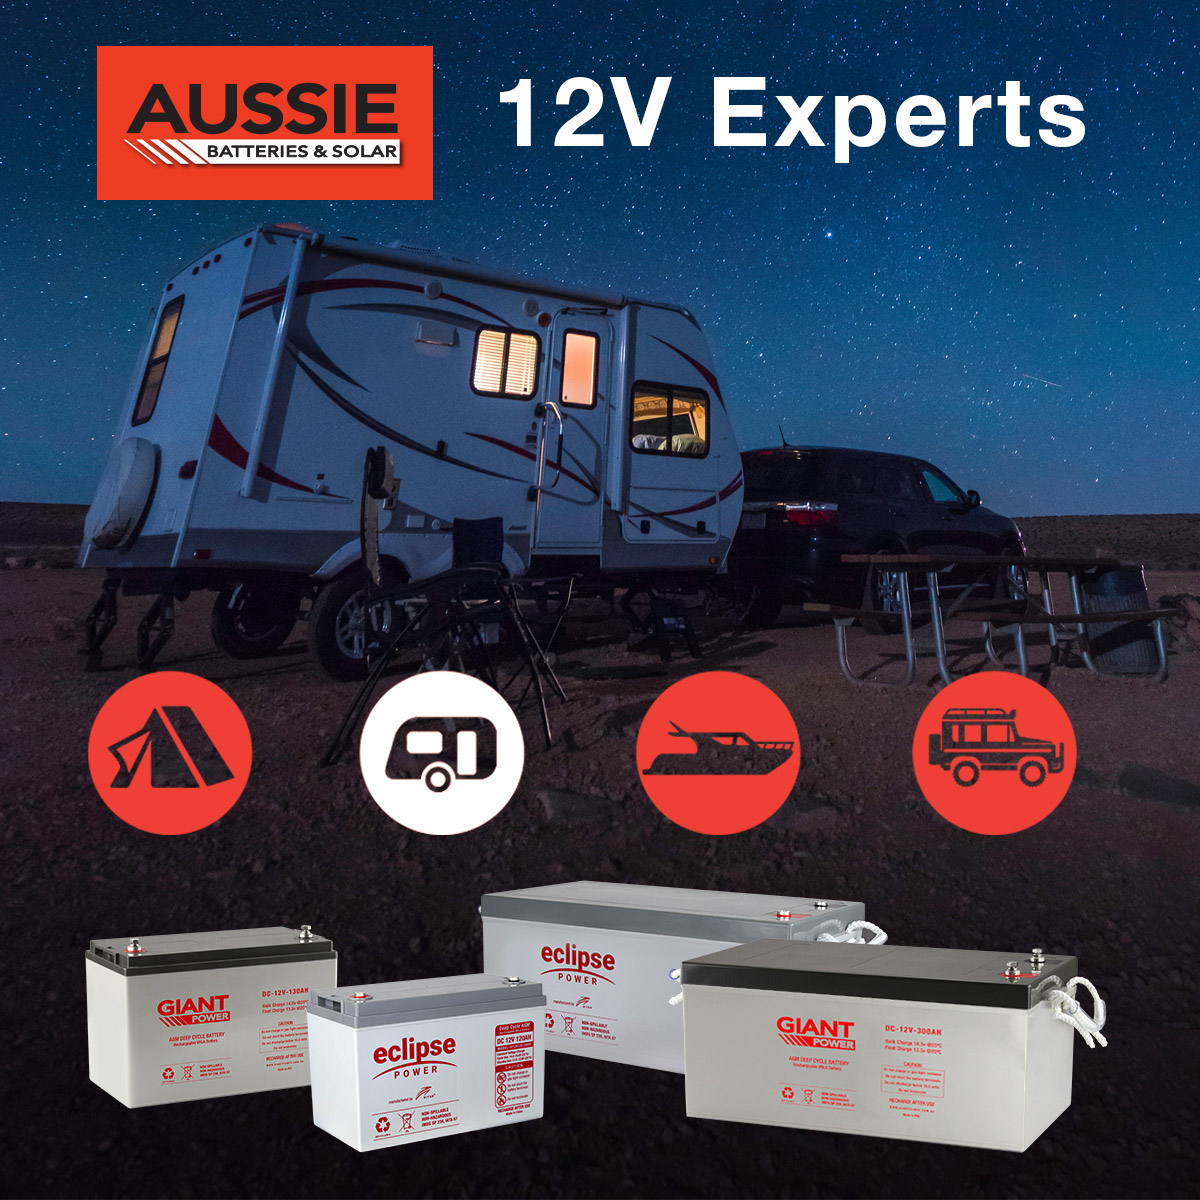 140AH Deep Cycle Batteries for Caravans and Camping Best Prices 